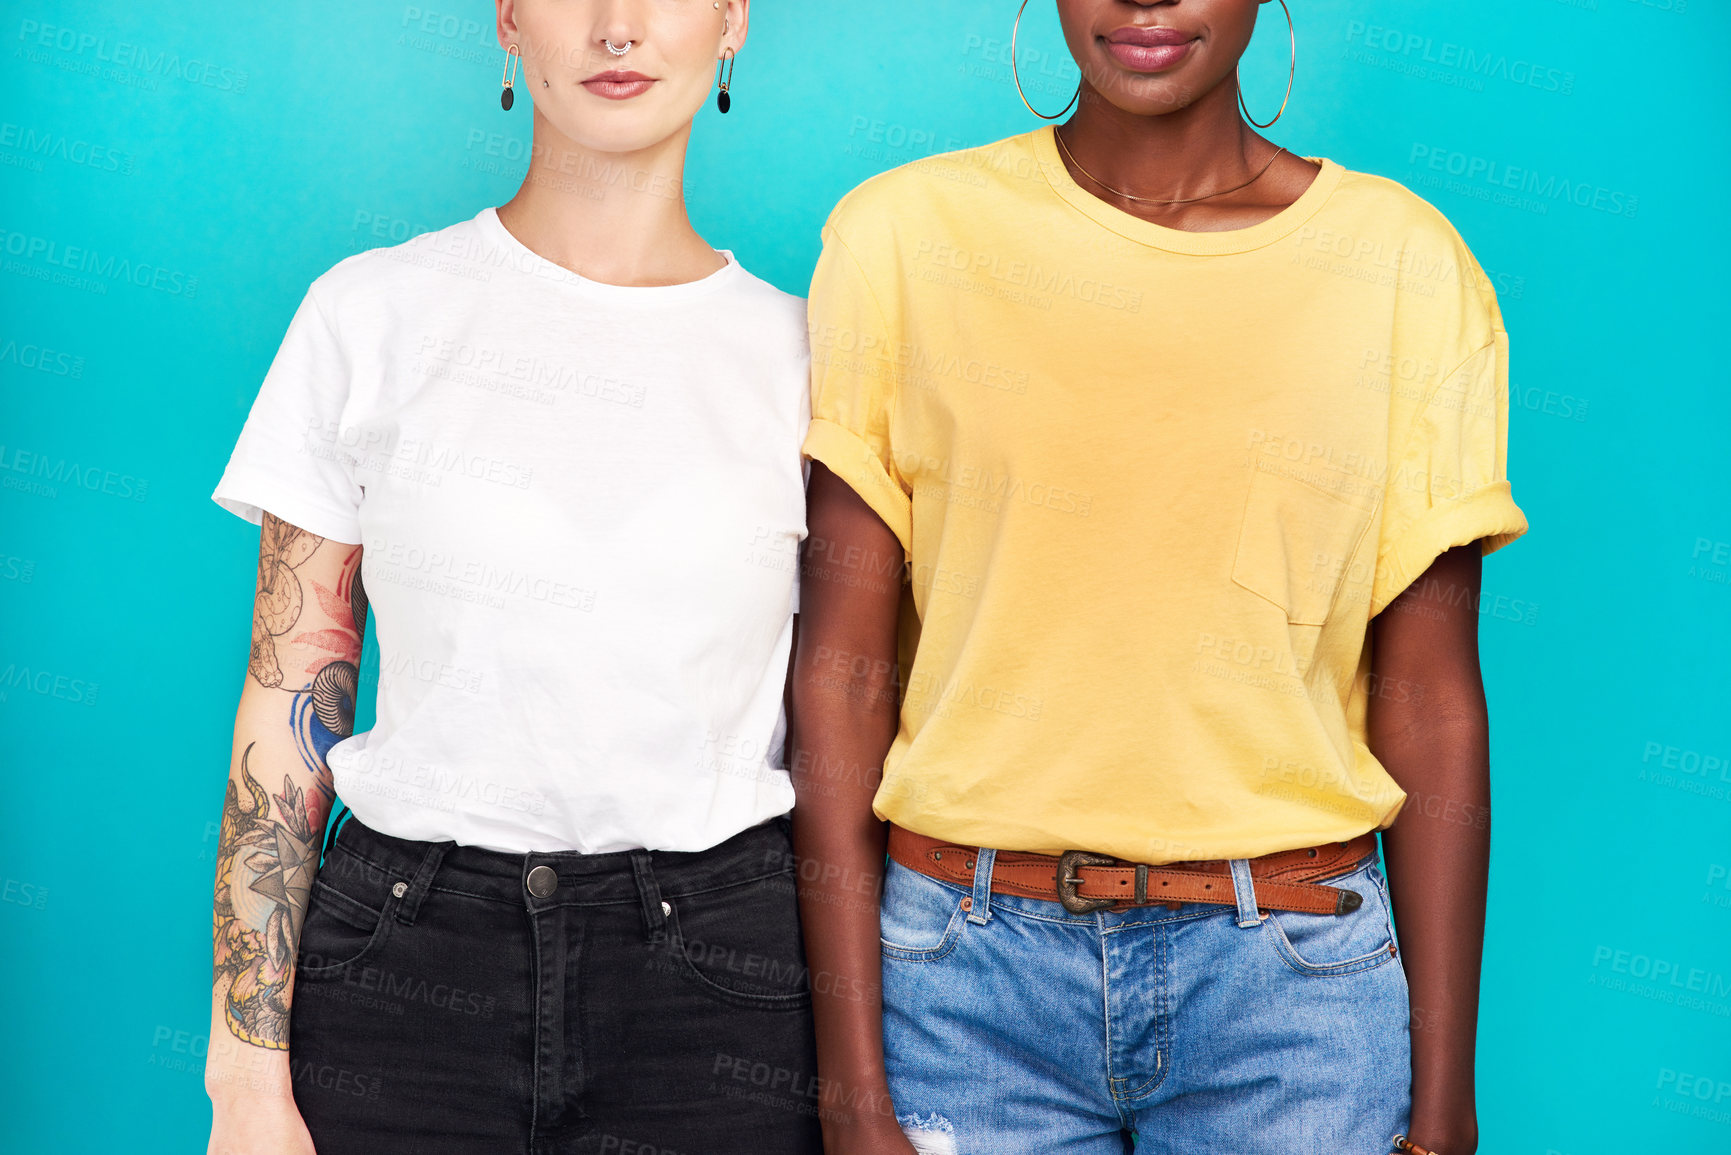 Buy stock photo Cropped studio shot of two young women standing together against a turquoise background